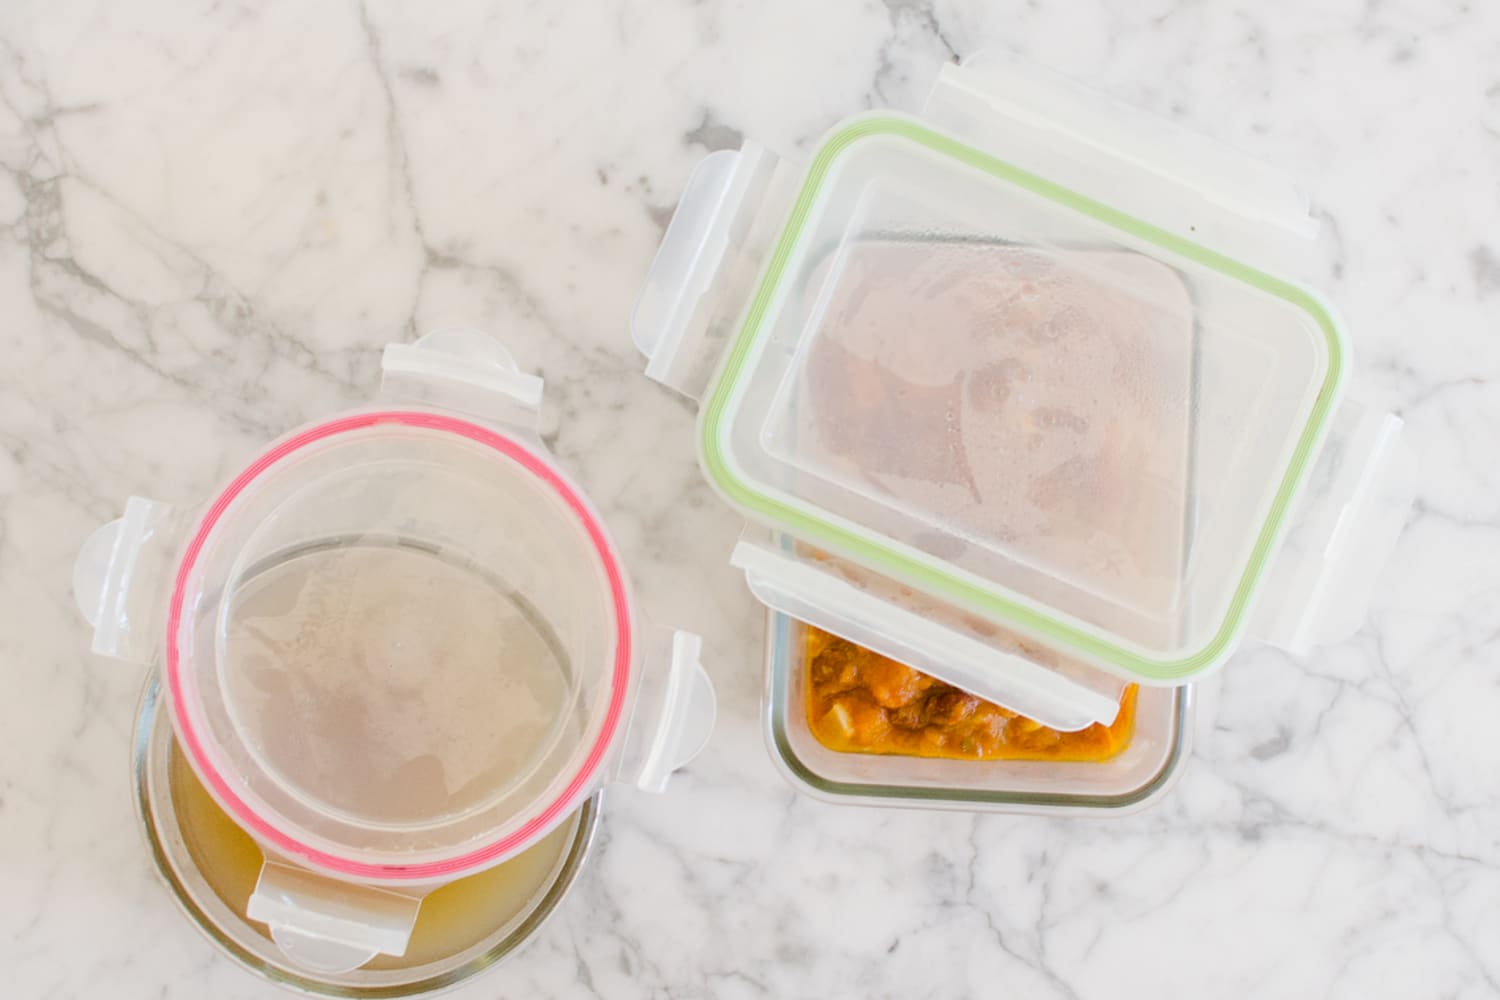 What do you call the household food storage containers that you use to hold  food that you've prepped, cooked, or have as leftovers? Do you use a  generic term or do you